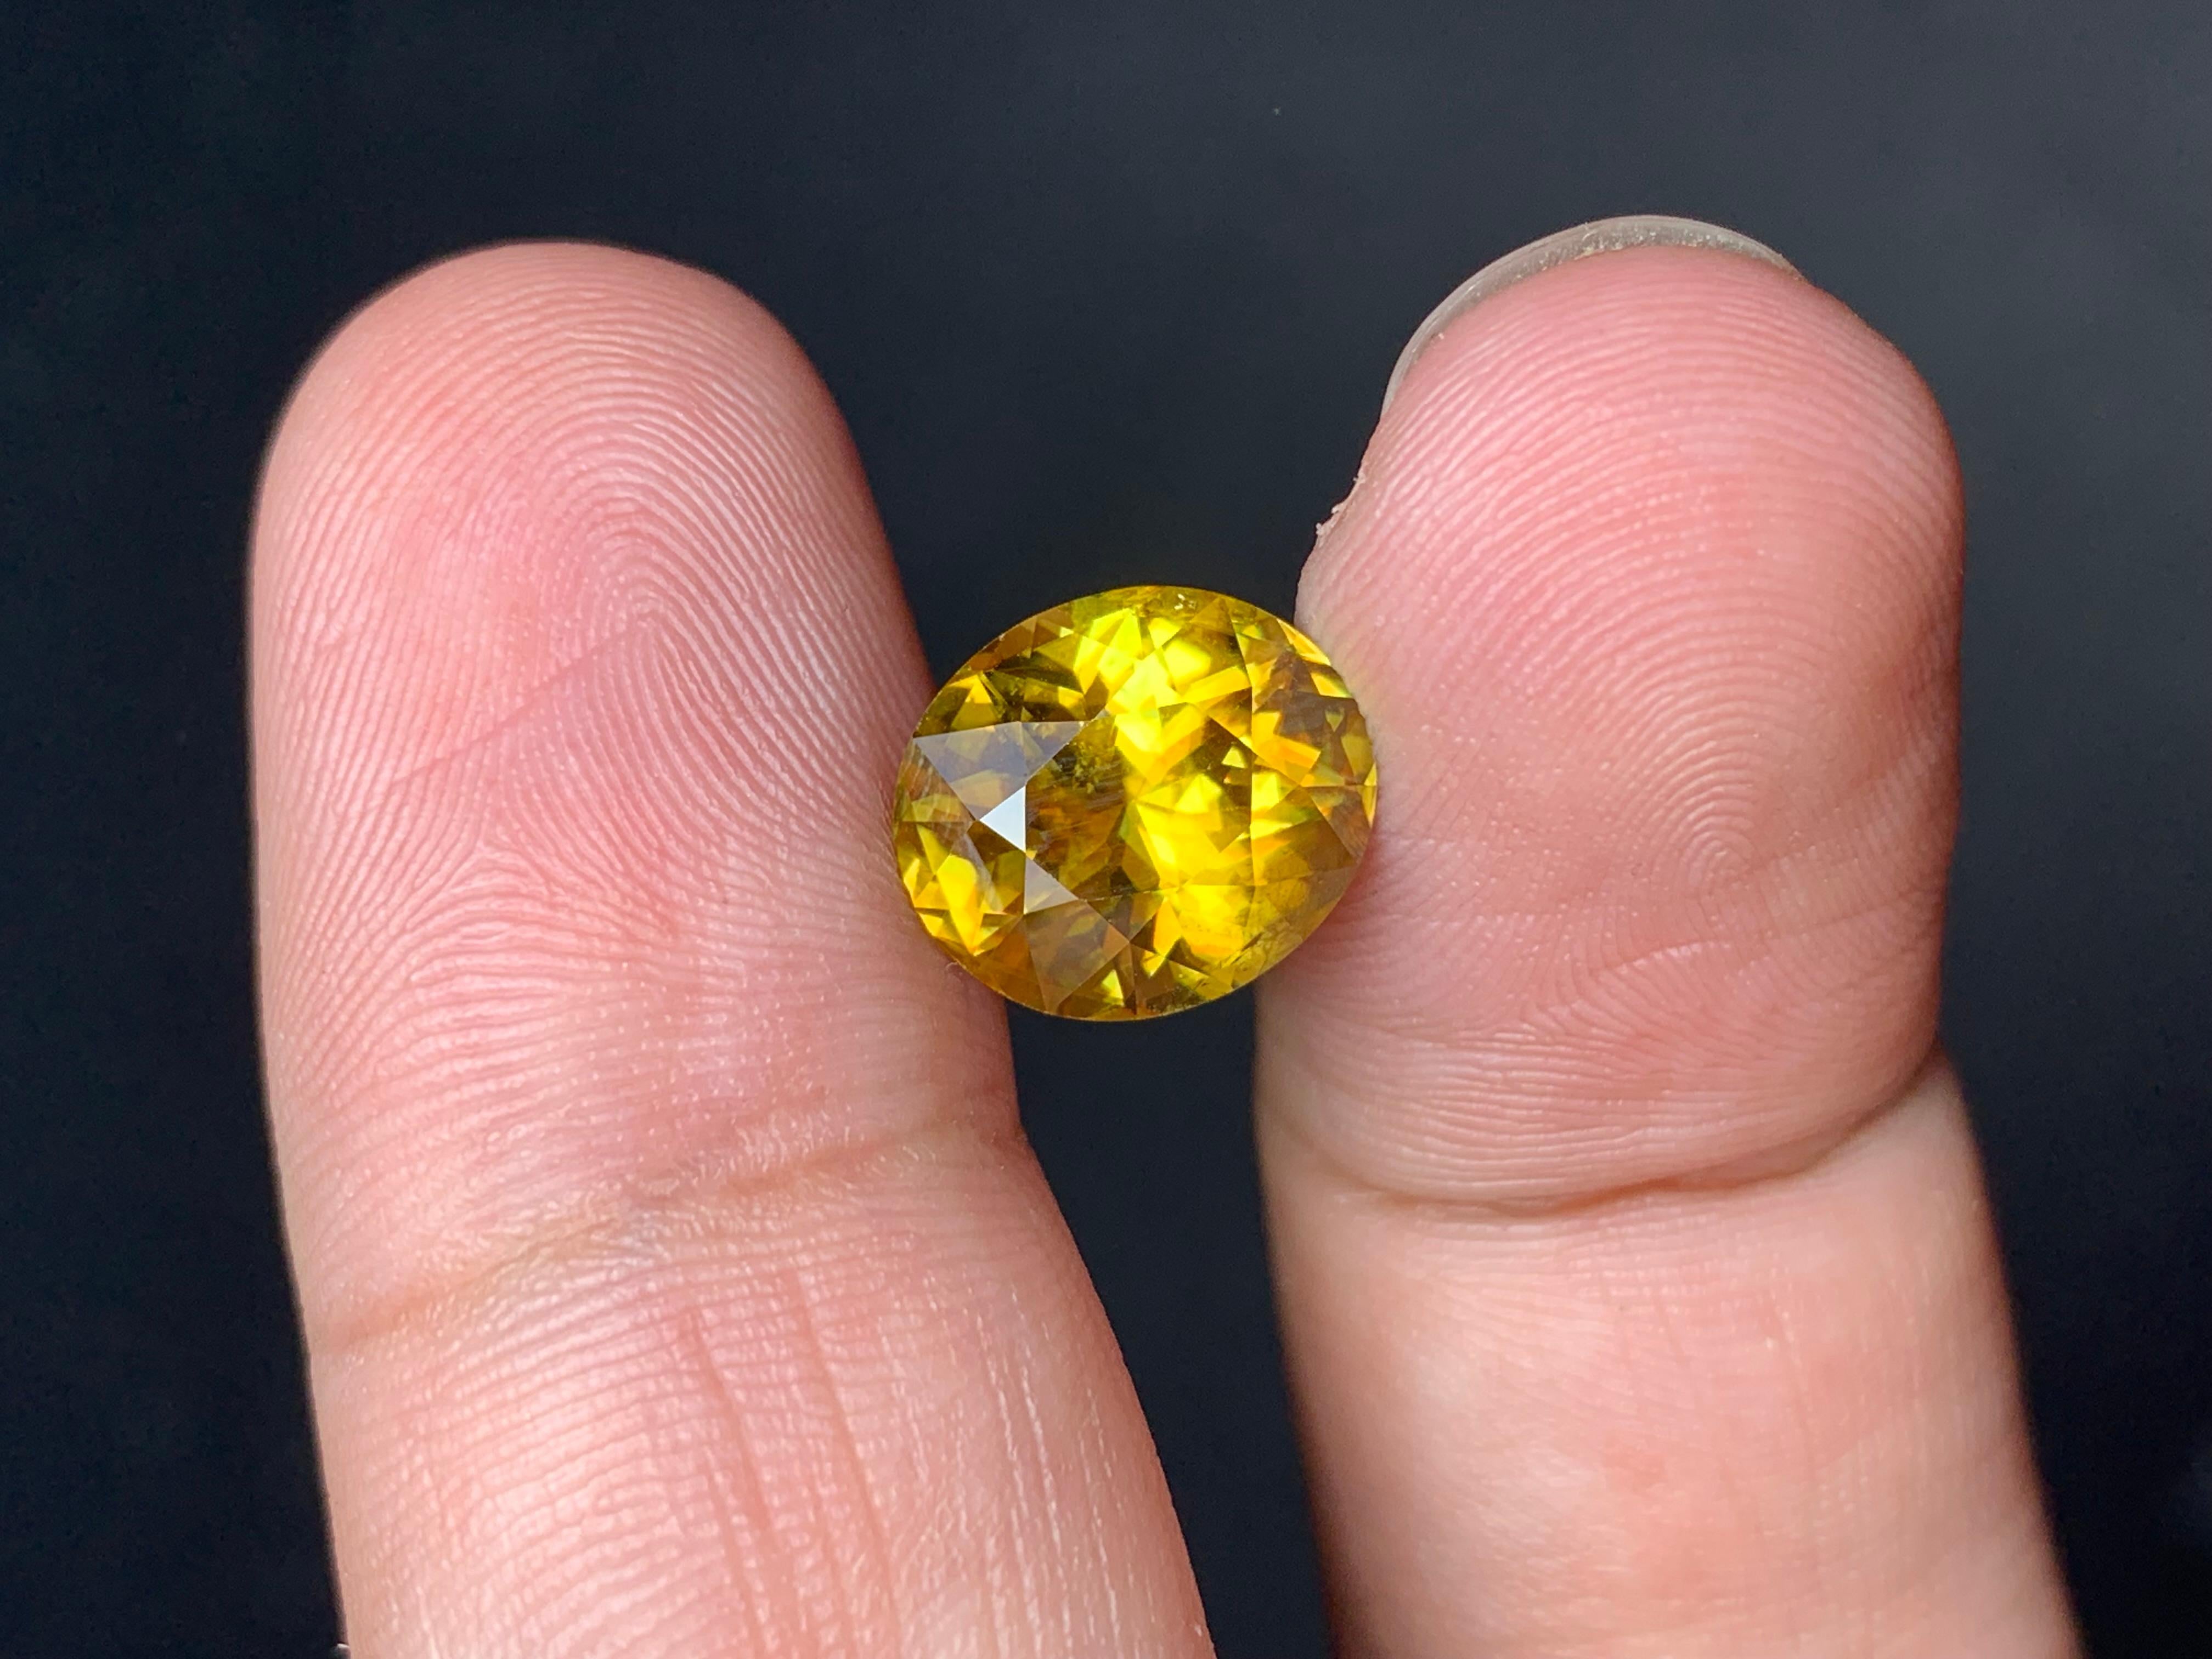 Loose Sphene
Weight: 4.70 Carats
Dimension: 11.3 x 9.8 x 6.5 Mm
Origin: Warsak Pakistan
Shape: Oval
Color: Yellow Fire 
Treatment: Non
Certificate: On Demand

Sphene, also known as titanite, is a remarkable and lesser-known gemstone that has